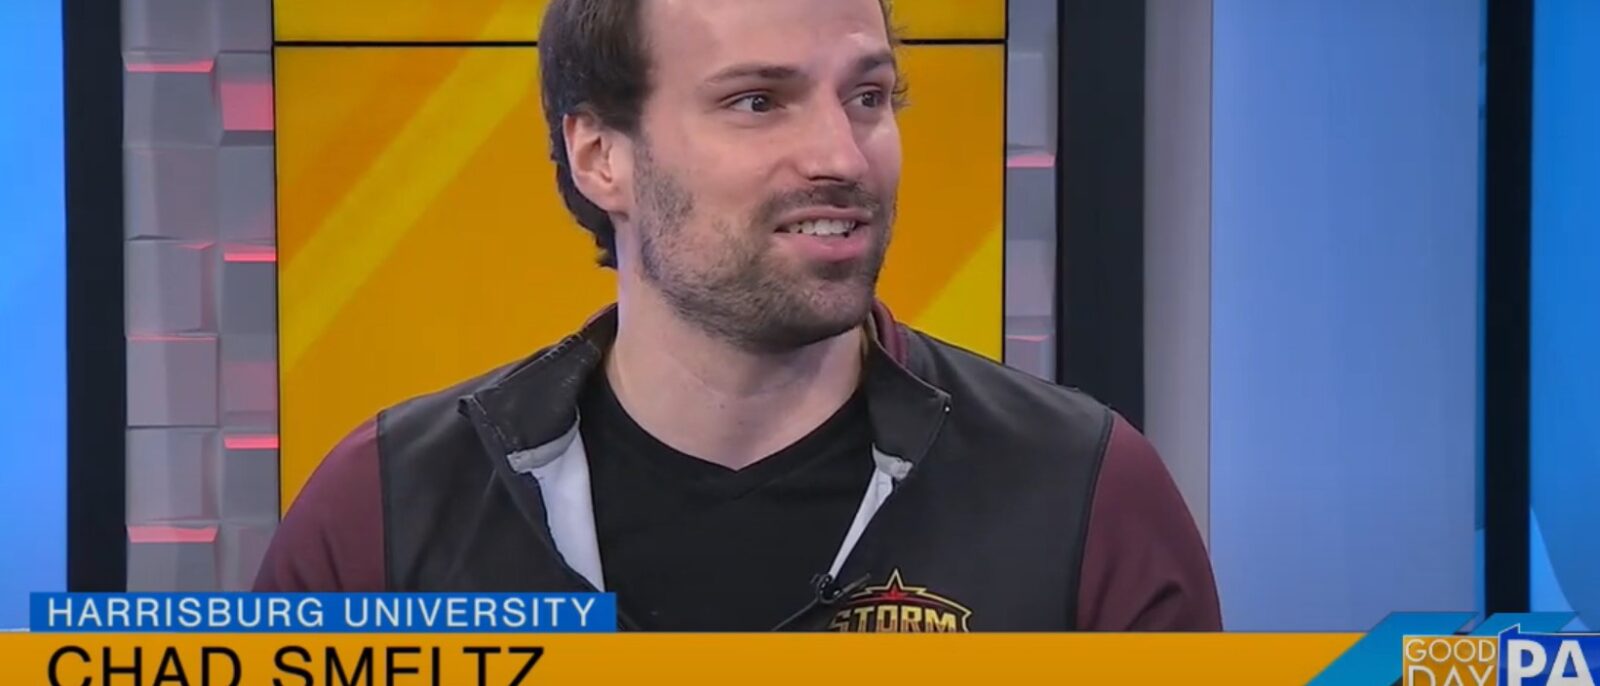 HU Esports director discusses HUE Invitational tournament on Good Day PA